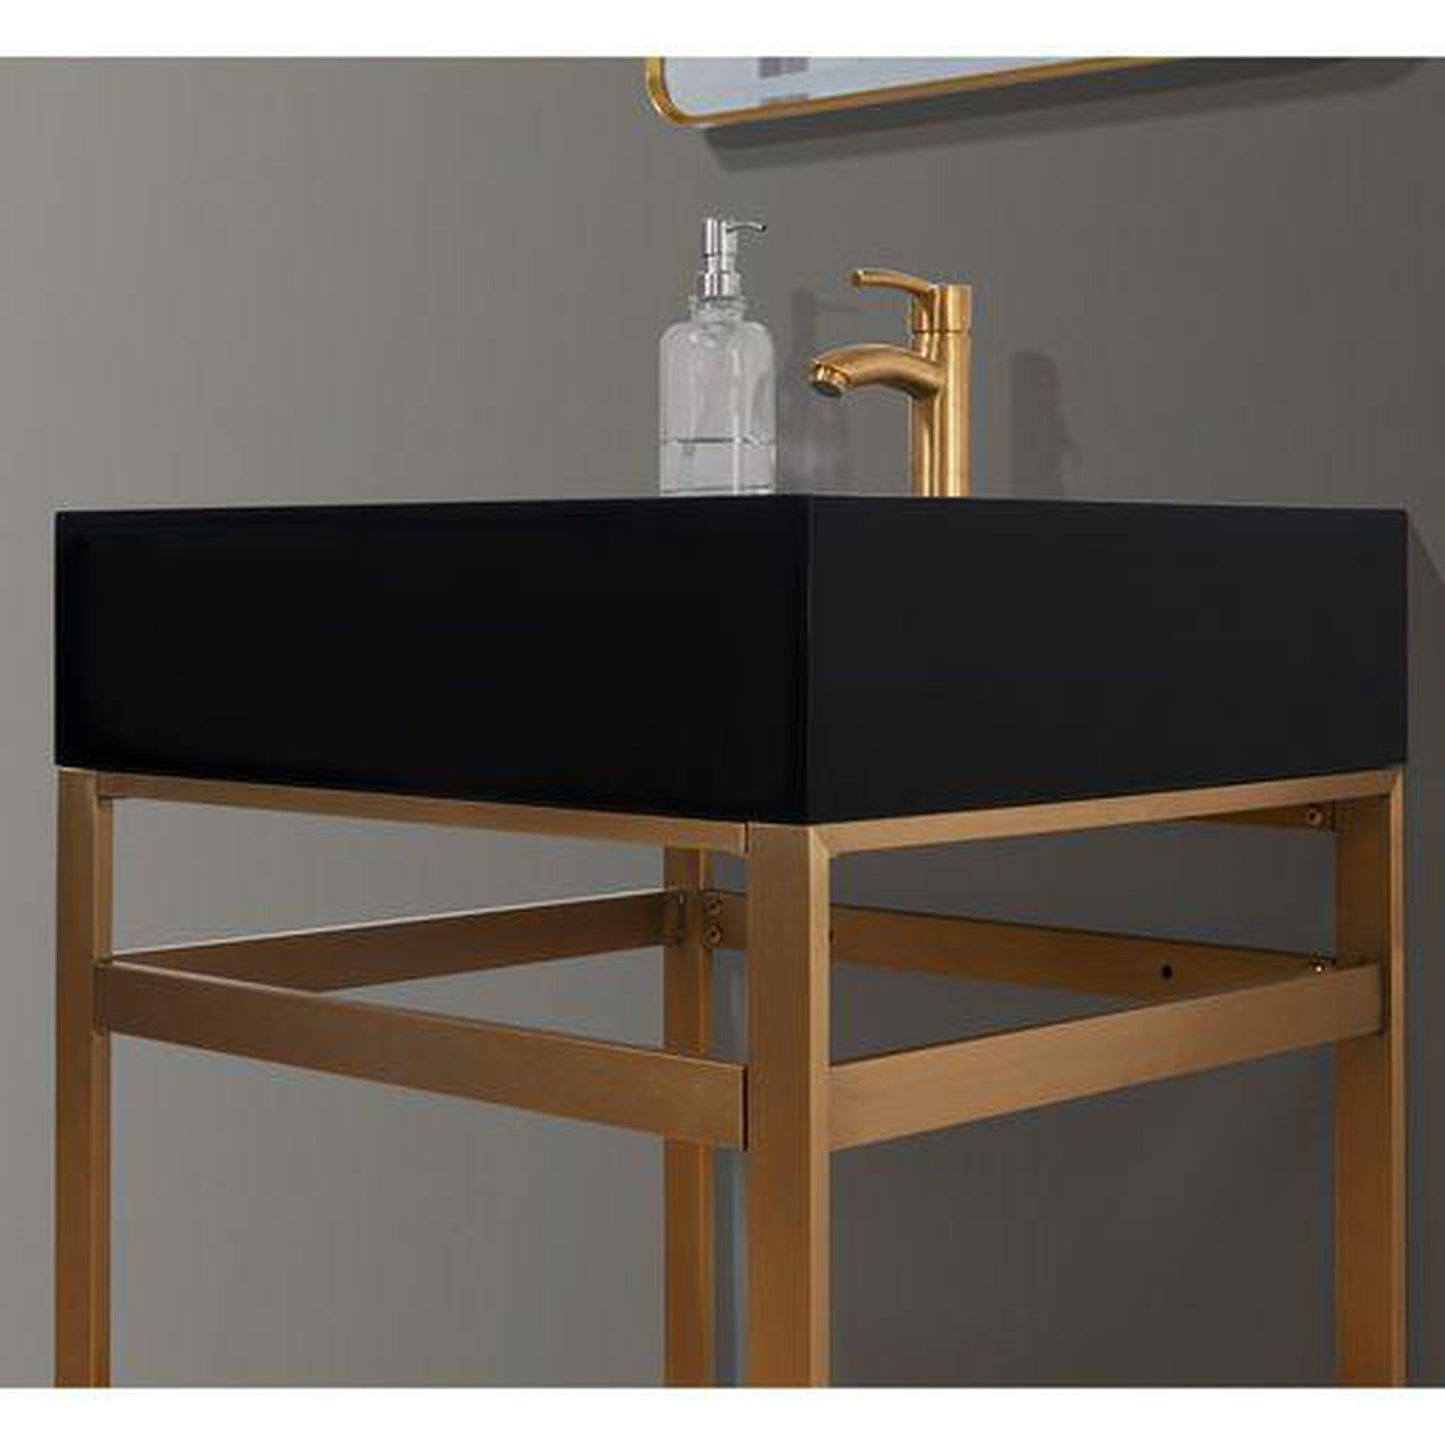 Altair Nauders 24" Brushed Gold Single Stainless Steel Bathroom Vanity Set Console With Mirror, Imperial Black Stone Top, Single Rectangular Undermount Ceramic Sink, and Safety Overflow Hole